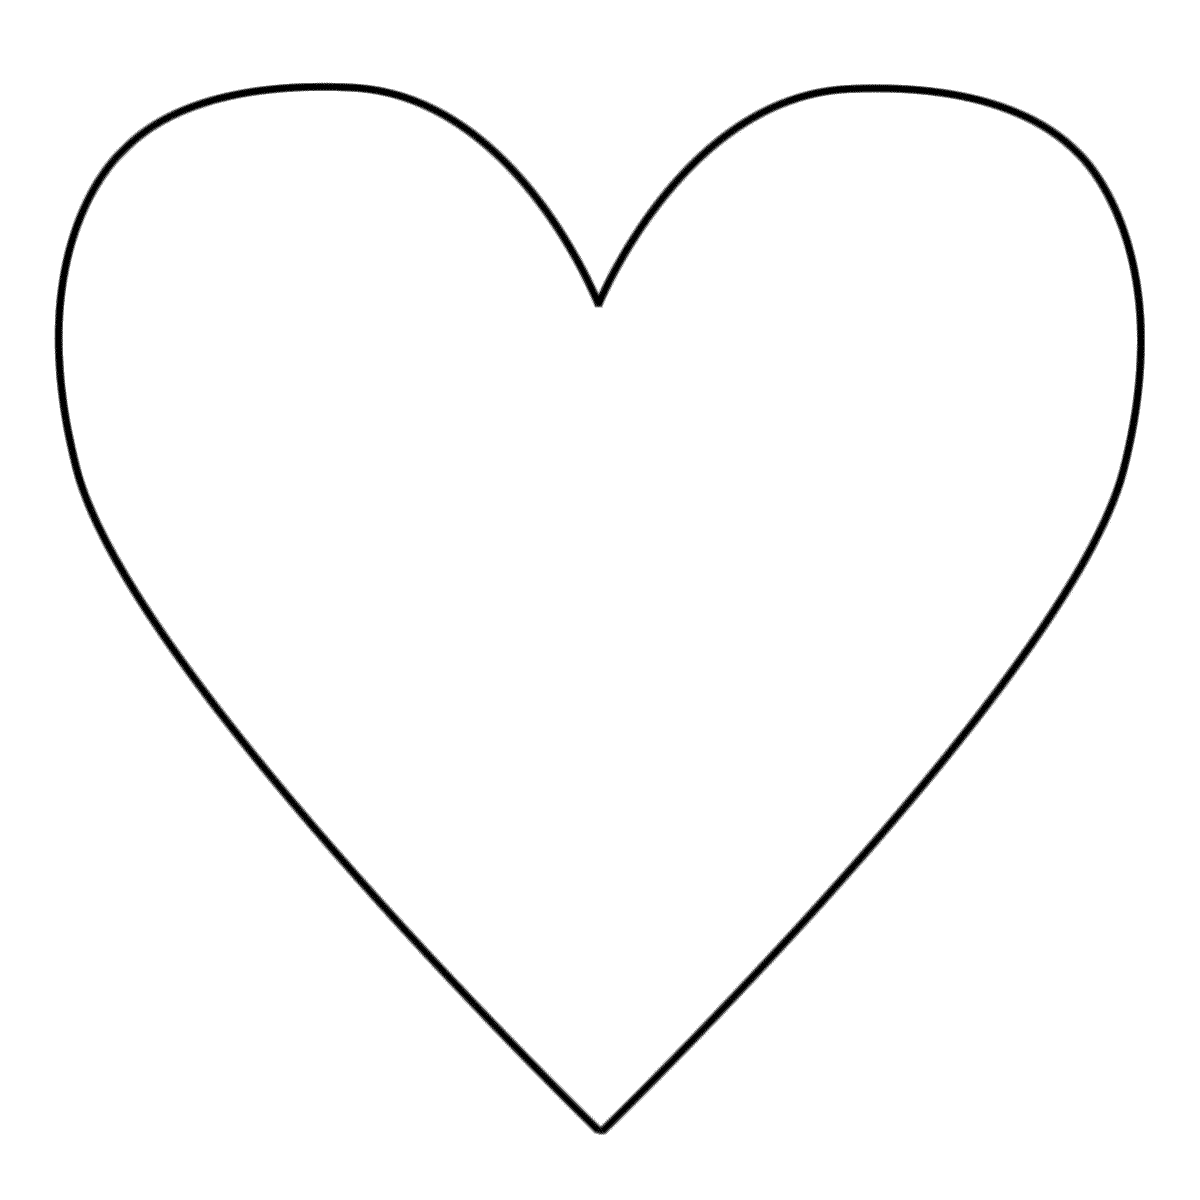 heart shape coloring pages free printable heart coloring pages for kids heart shape heart pages coloring 